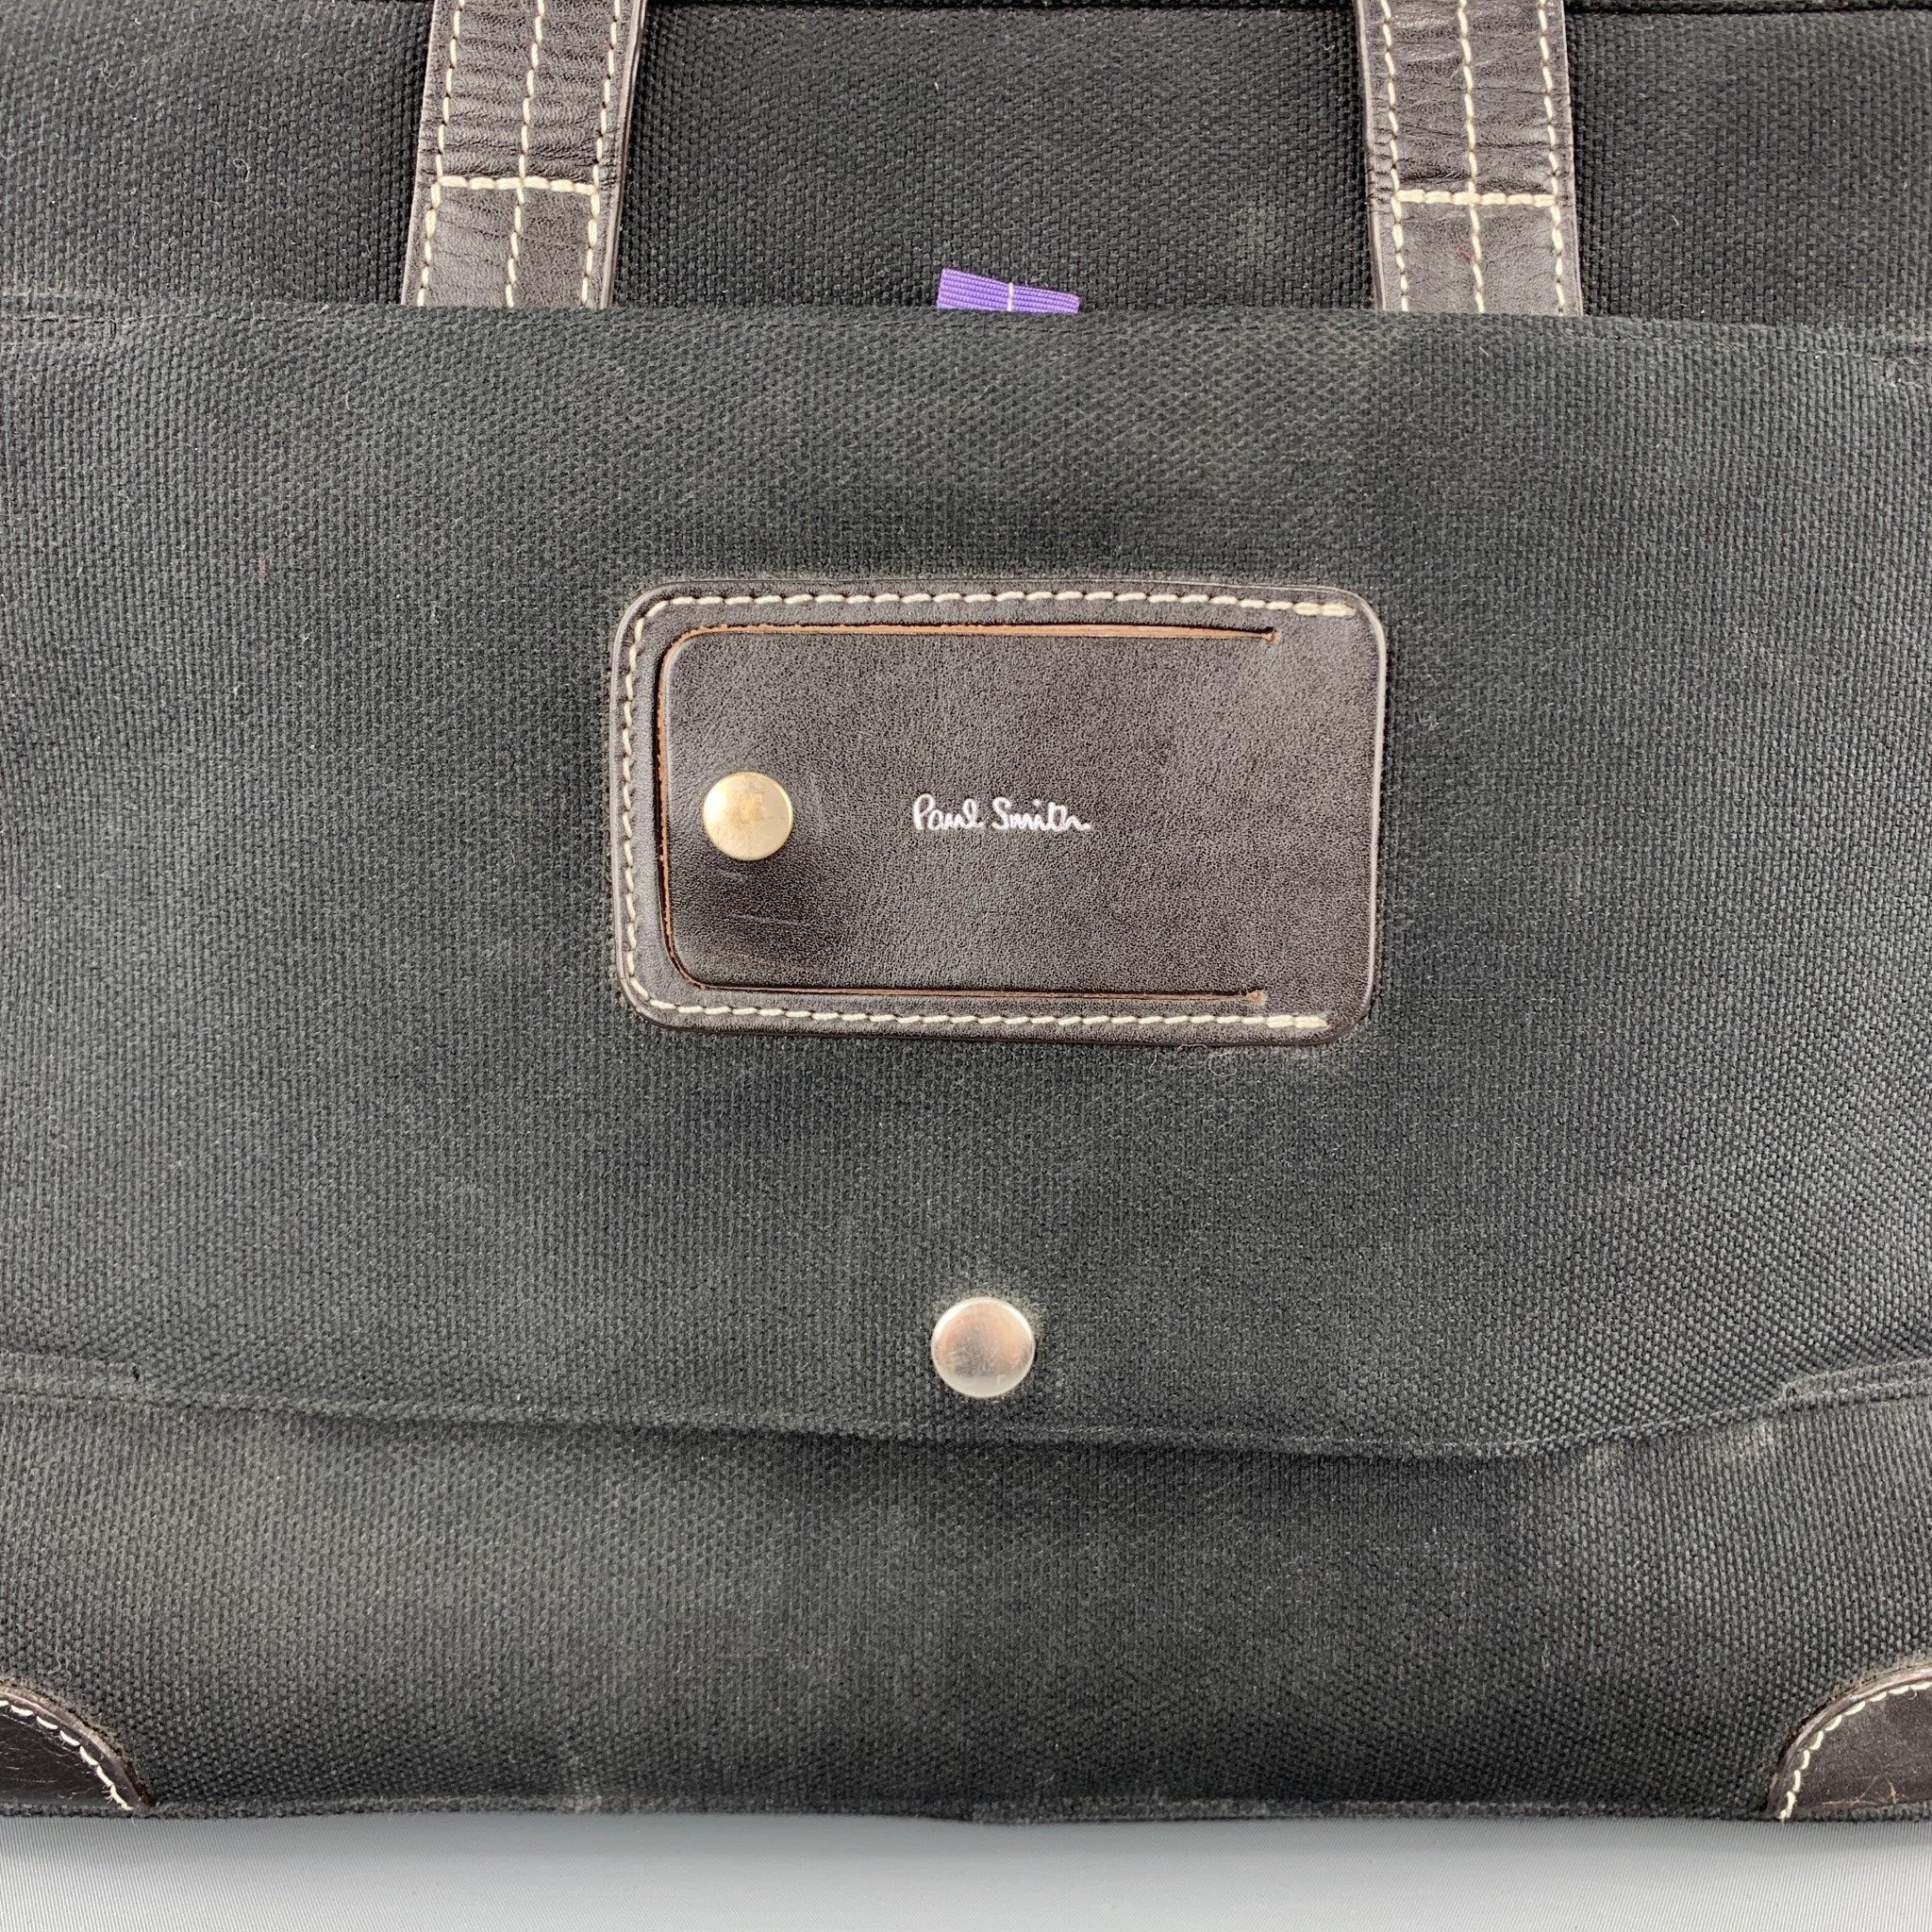 PAL SMITH work bag comes in black canvas with black leather trim, contrast stitching, double top handles, detachable strap, and purple multi-compartment interior.
Good
Pre-Owned Condition. 

Measurements: 
  Length: 15.5 inches Width: 6 inches